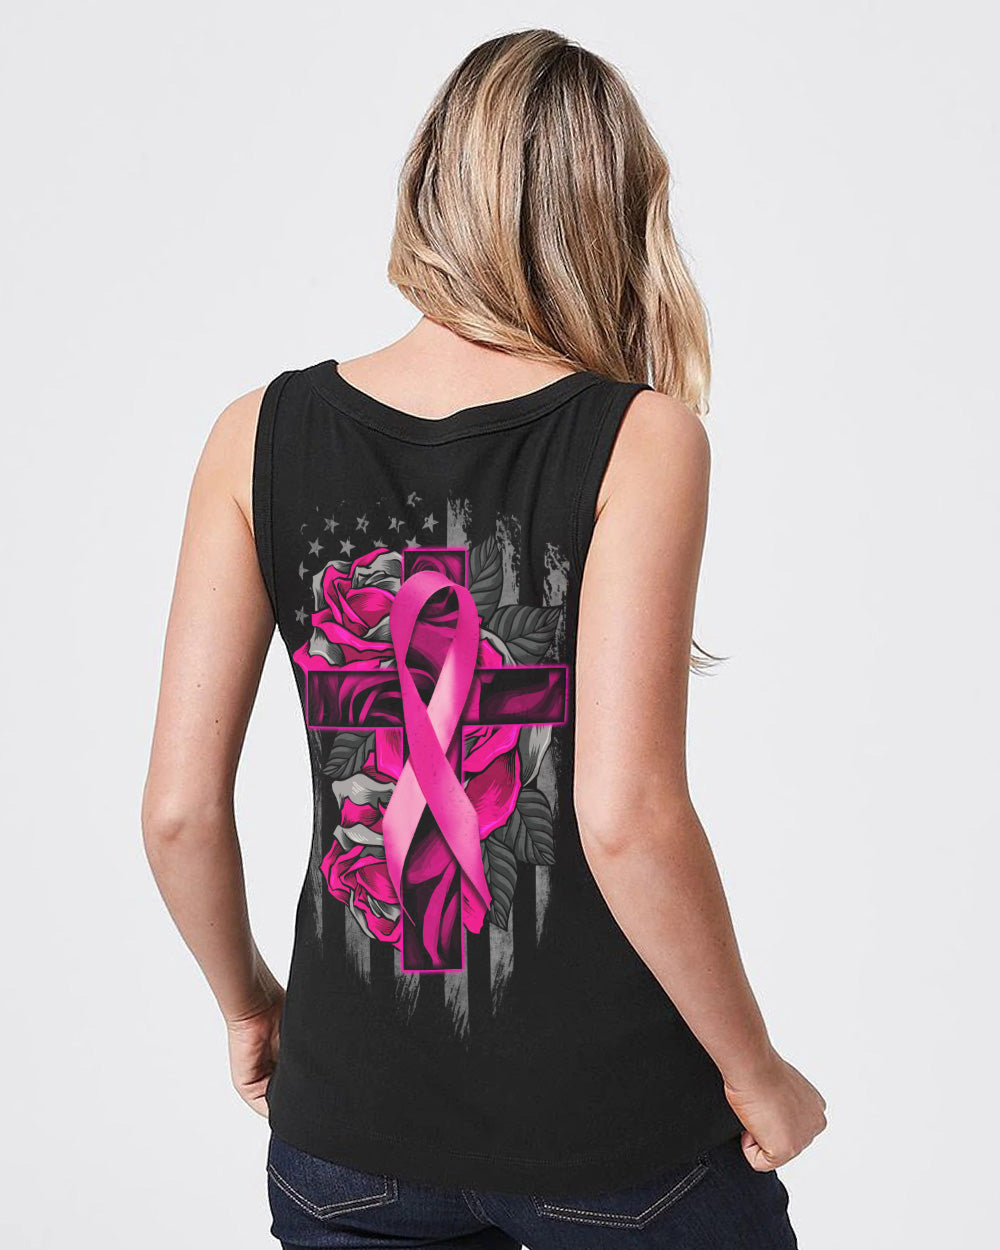 Rose With Ribbon Cross Flag Women's Breast Cancer Awareness Tanks